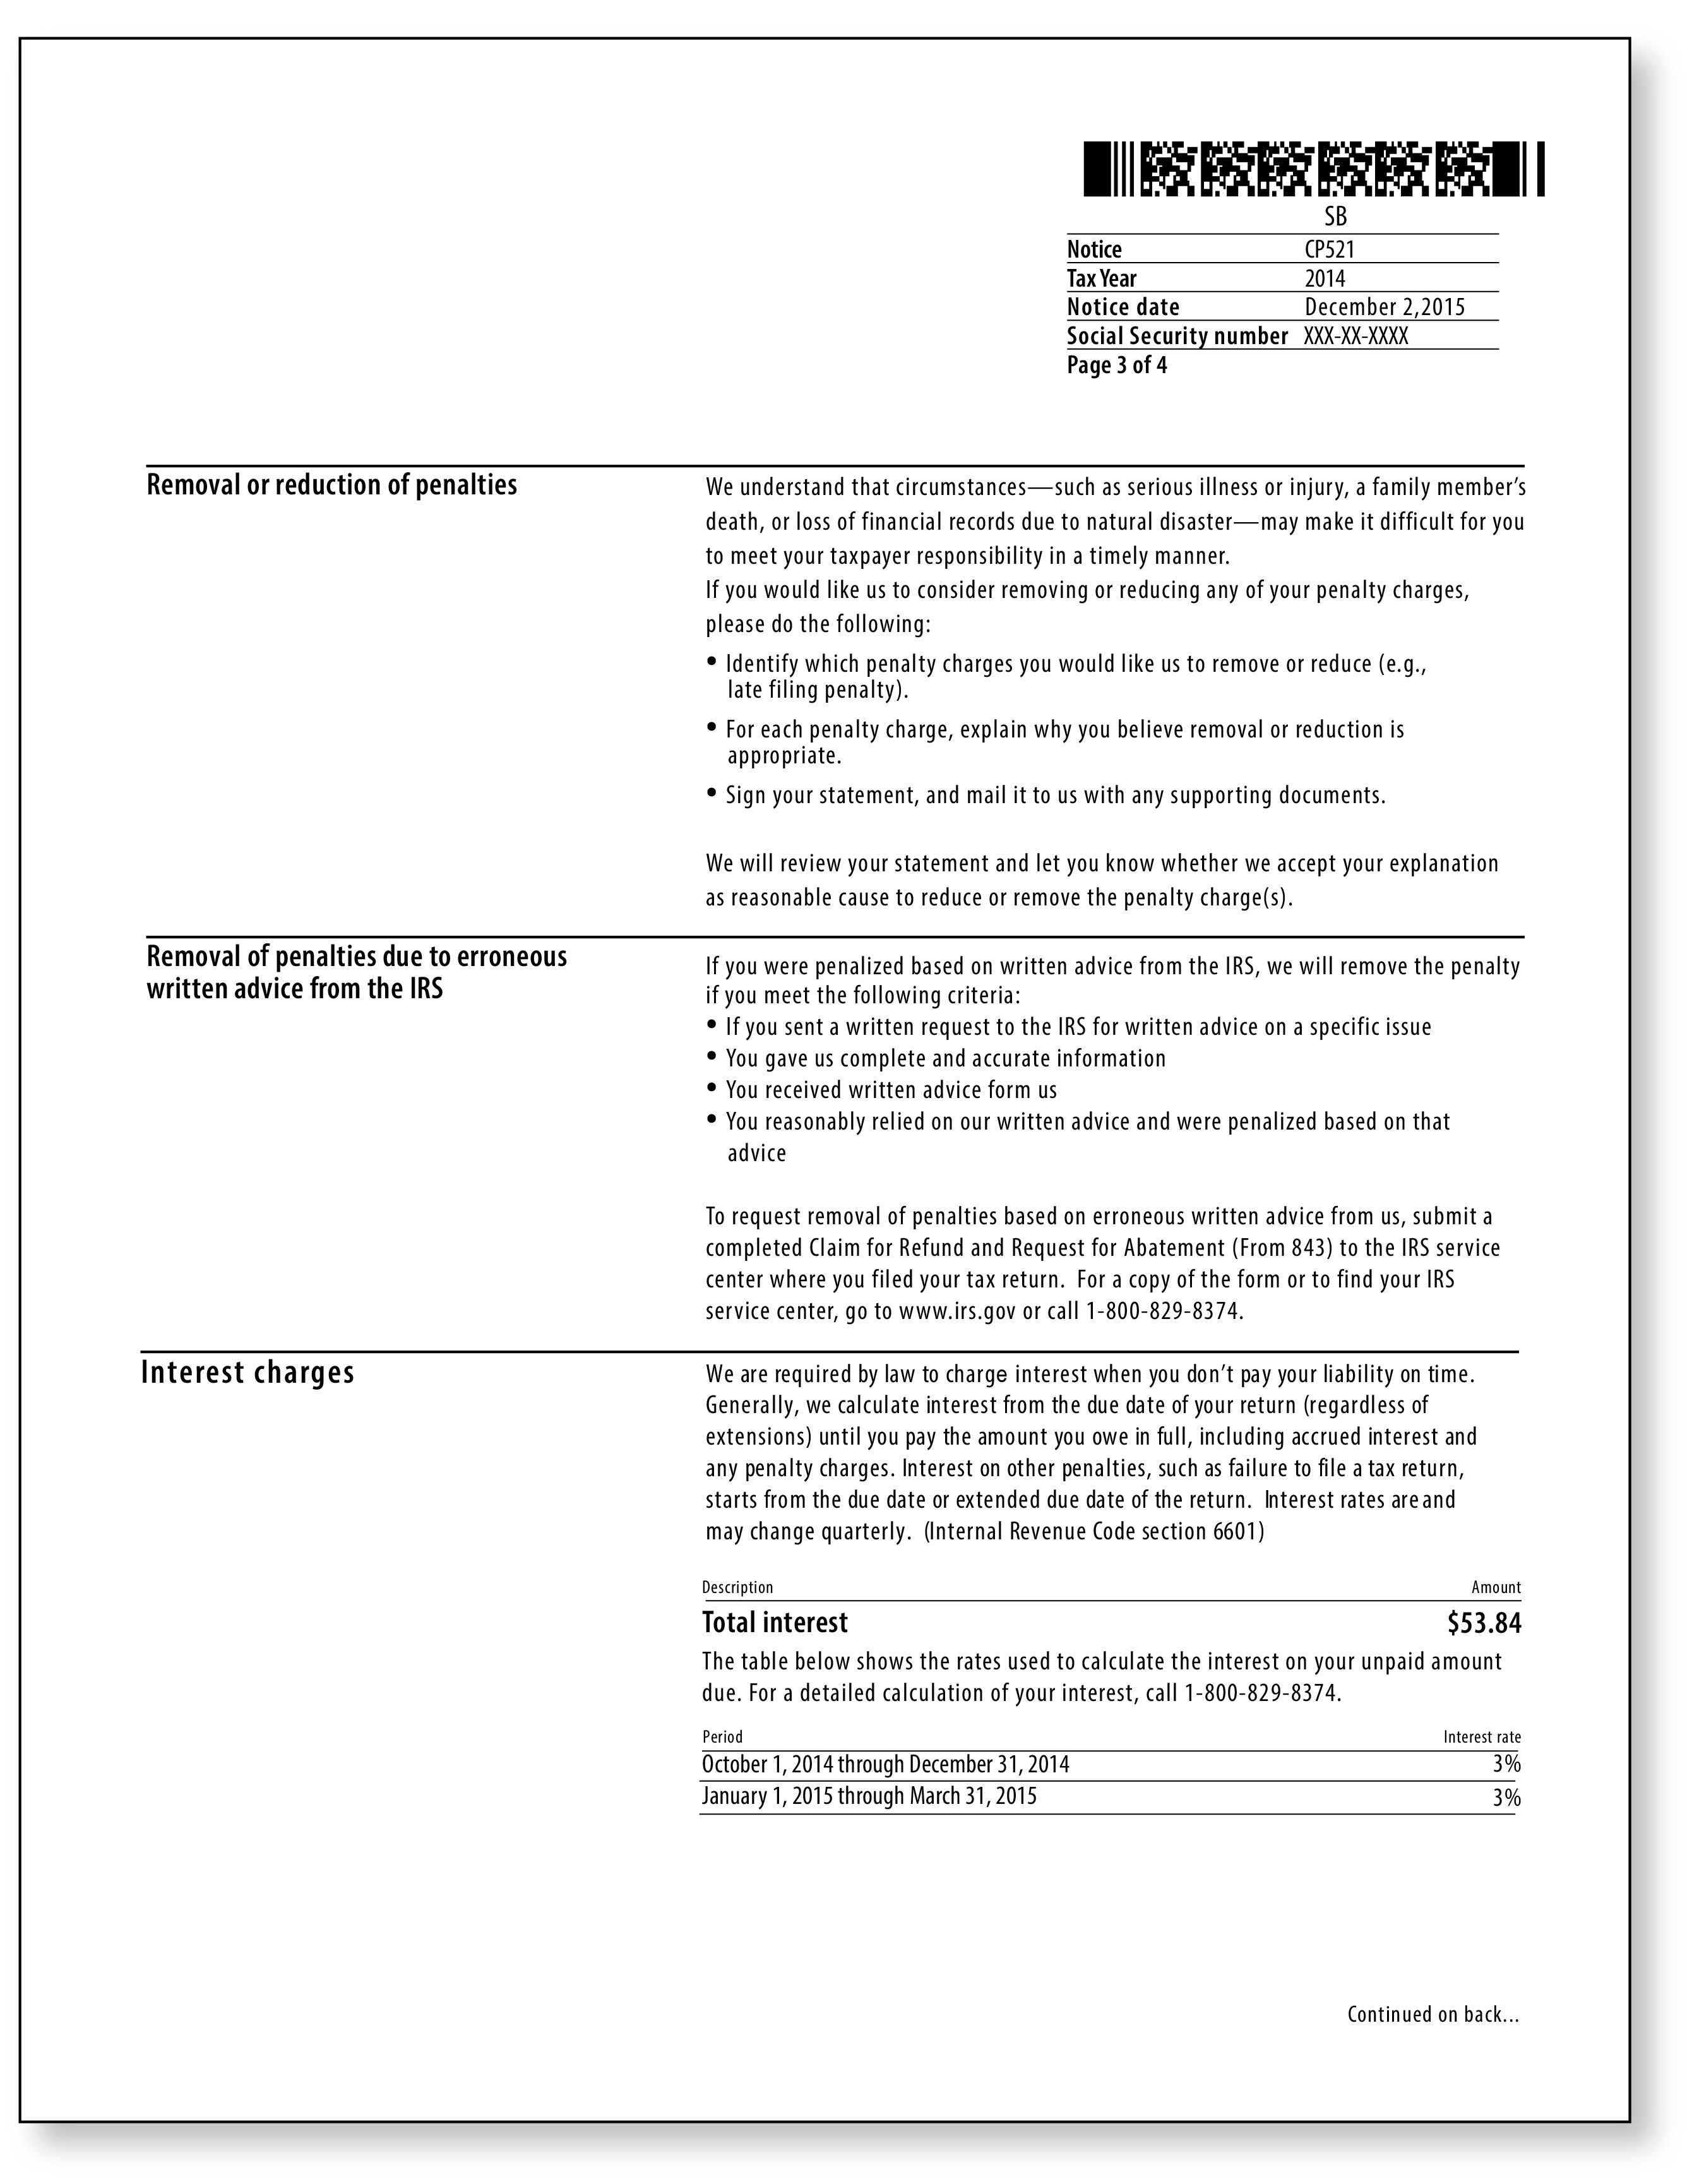 IRS Audit Letter CP521 – Sample 1